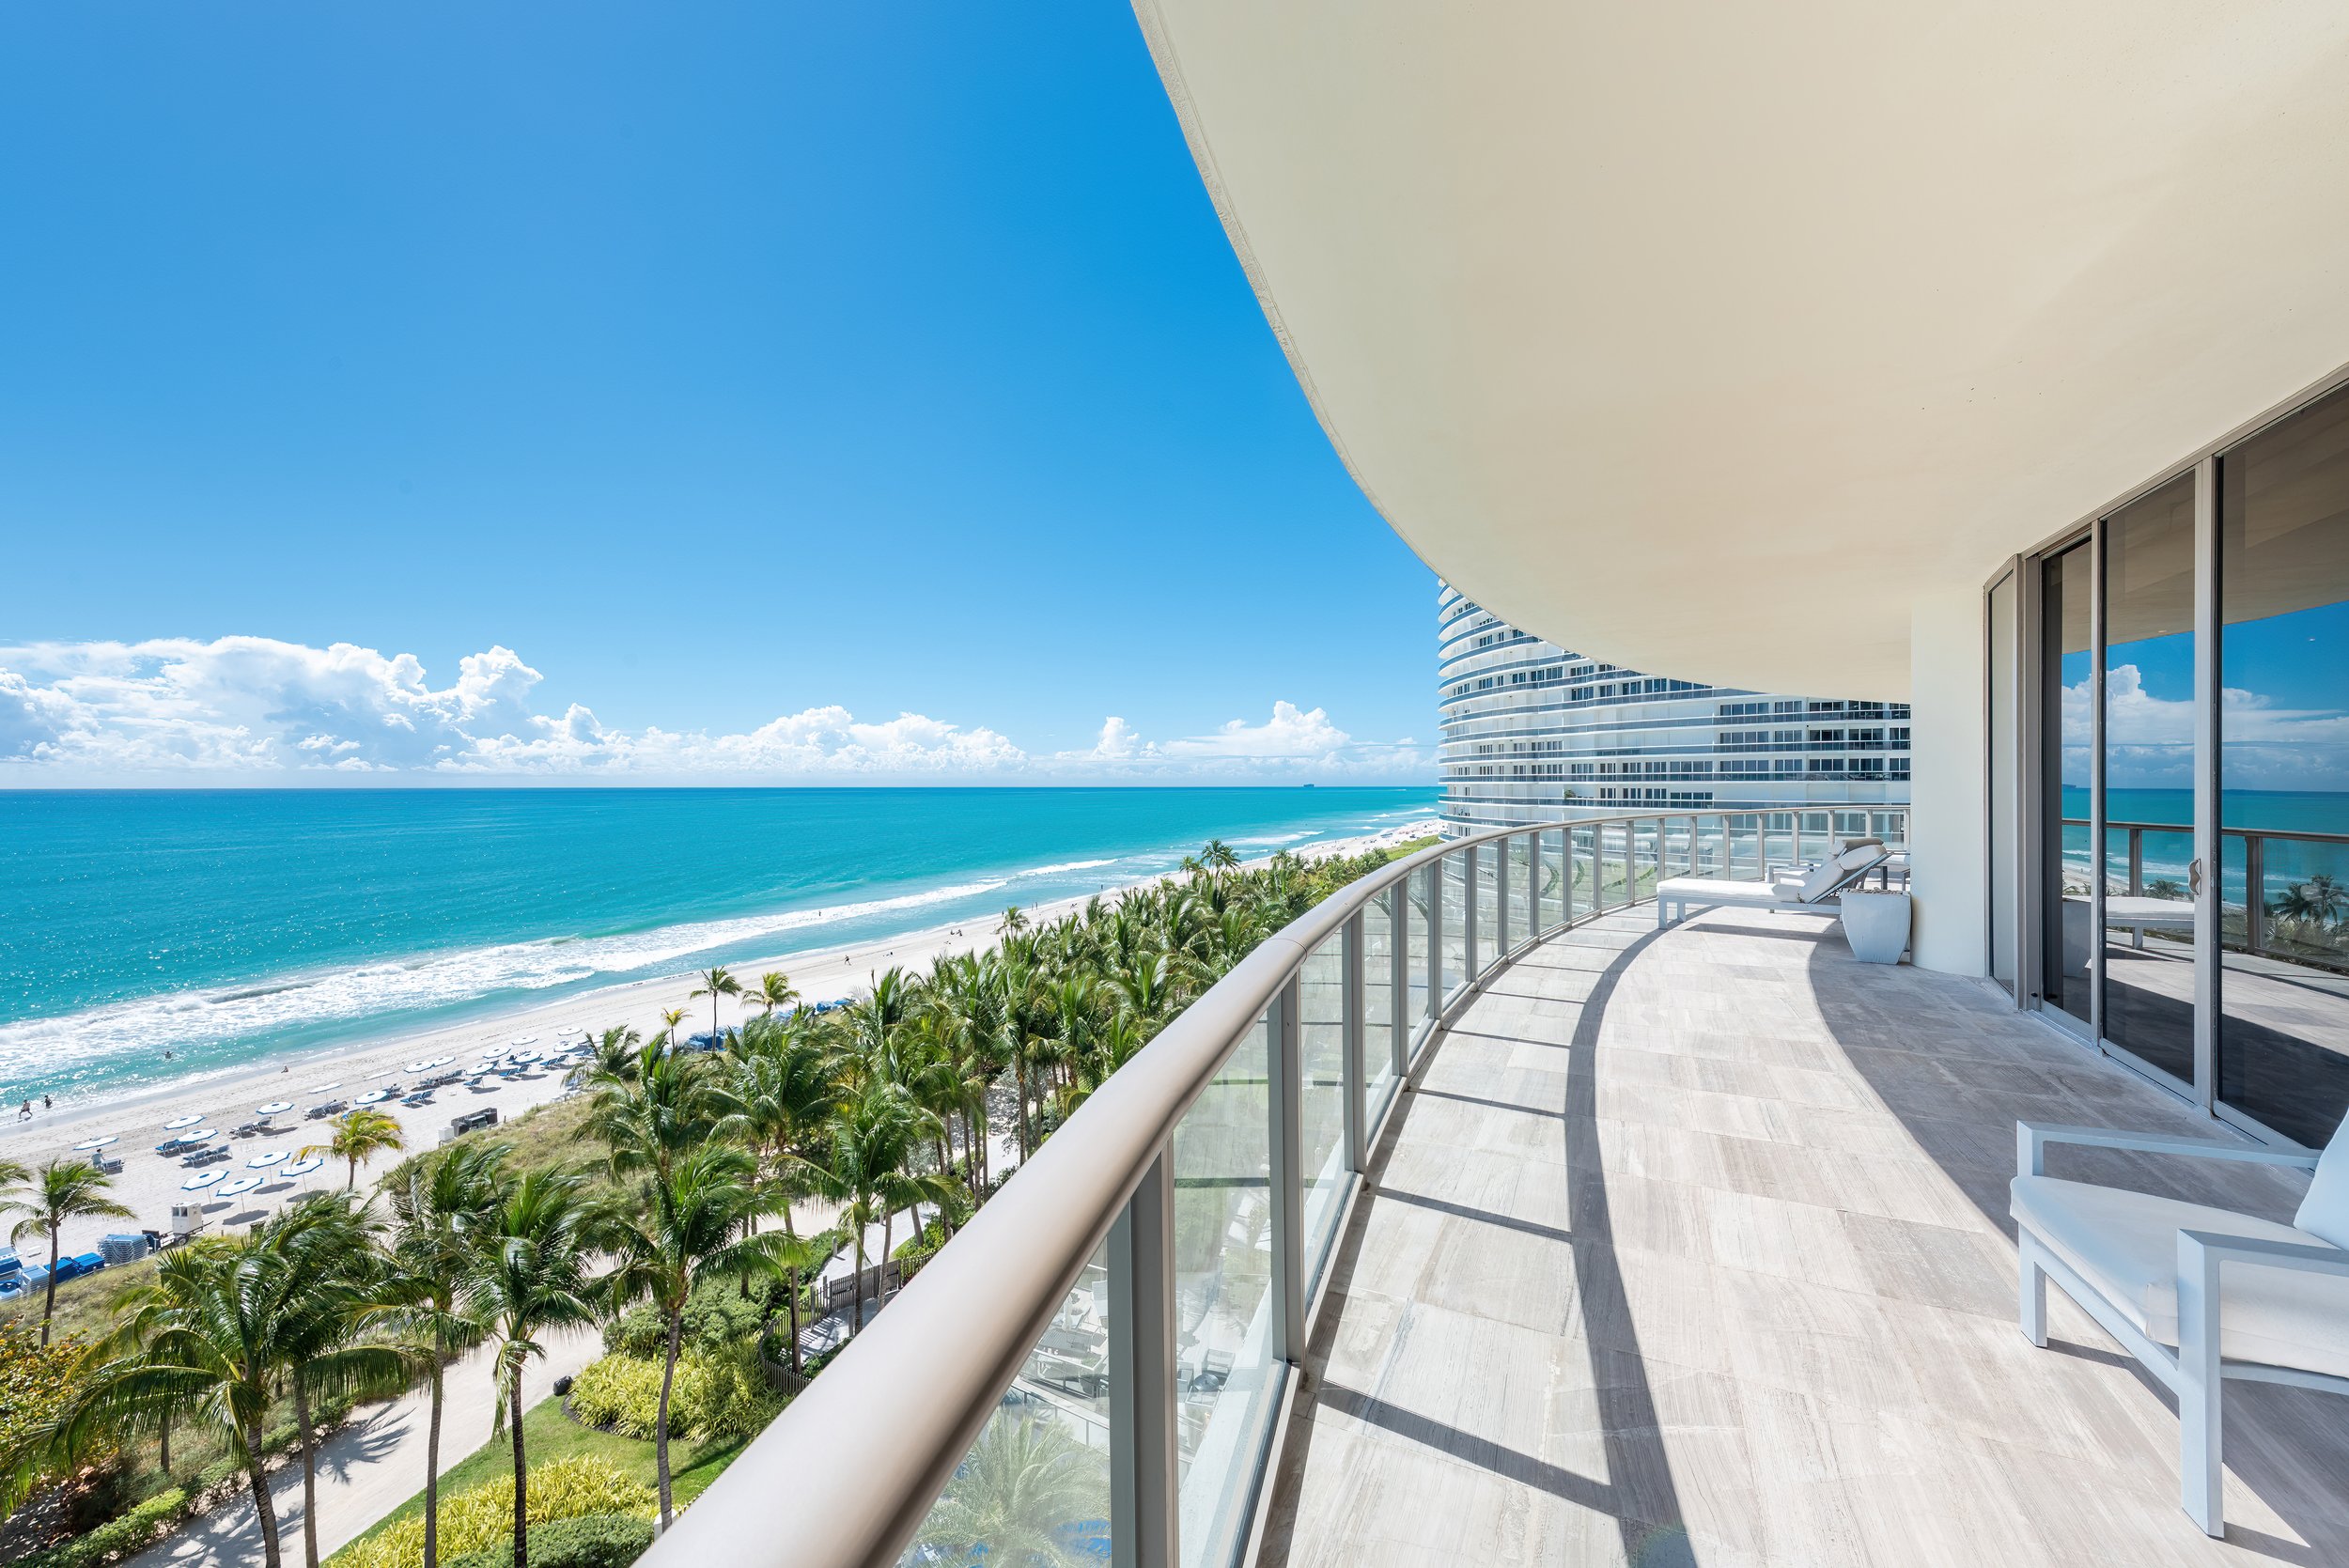 Master Brokers Forum Listing: See The Views From This Beachfront Condo In St. Regis Bal Harbour Asking $10.995 Million 2.JPG